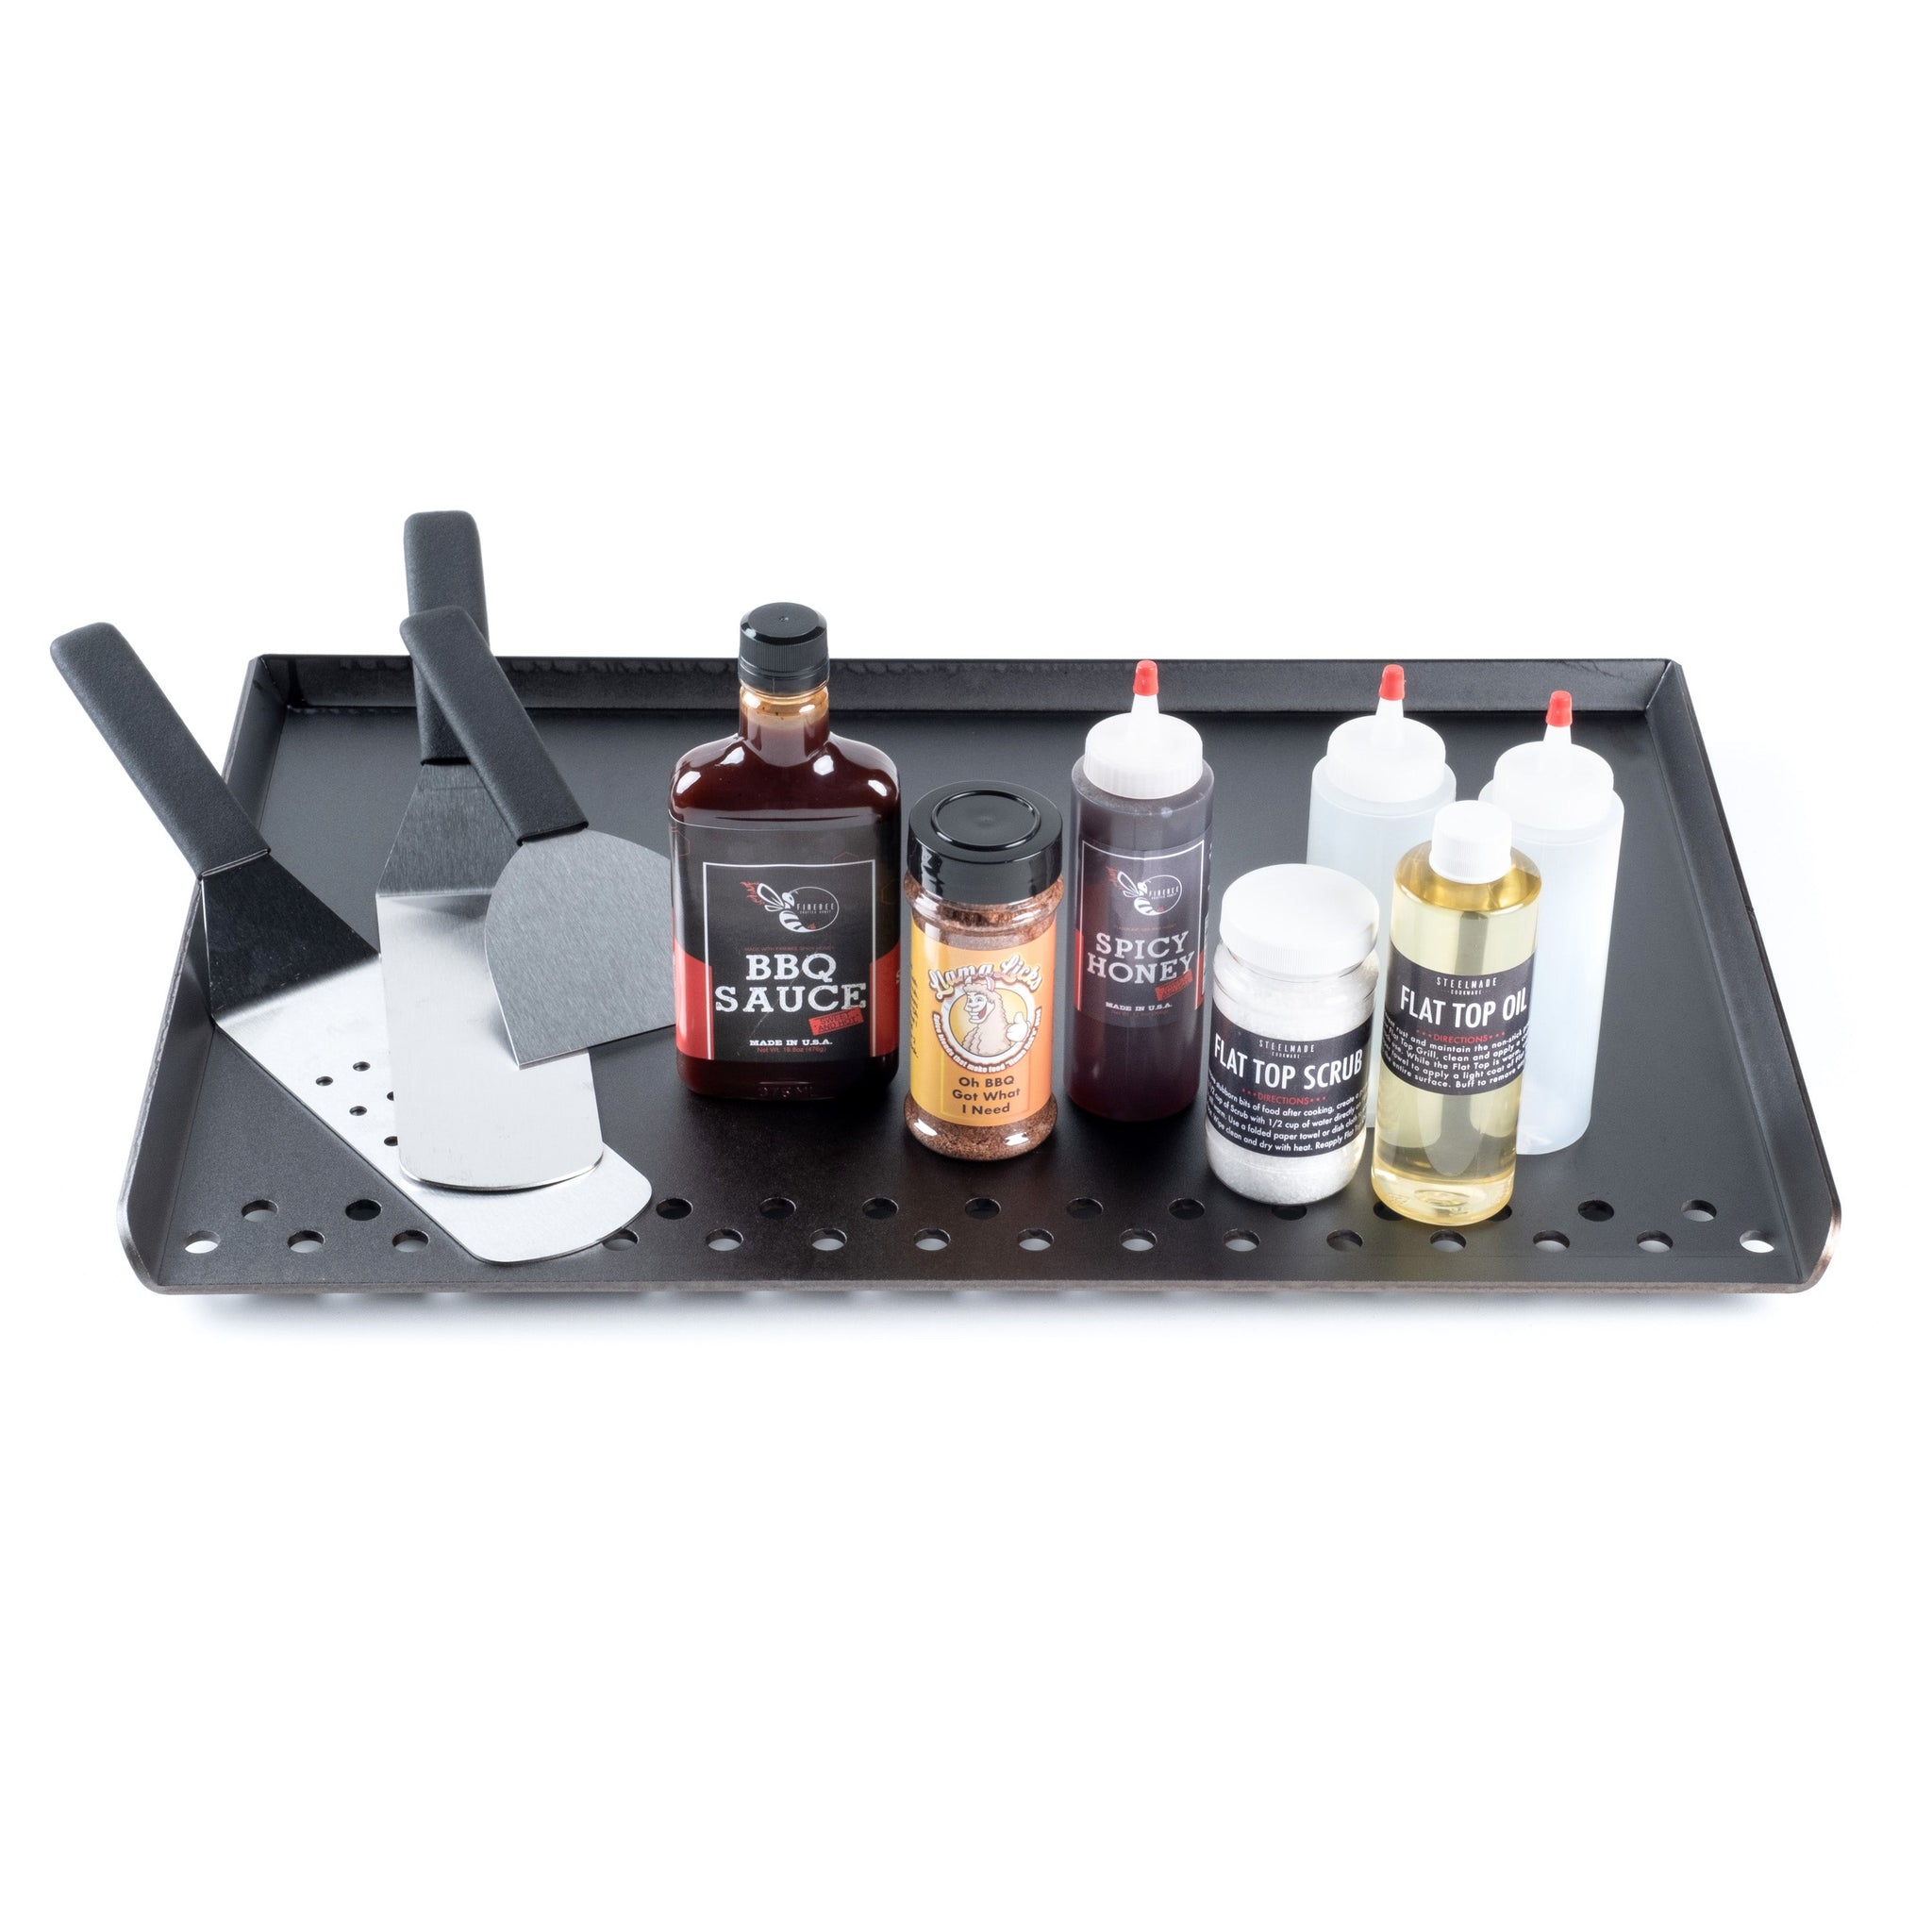 Starter Kit - Flat Top For Outdoor Grill - Steelmade